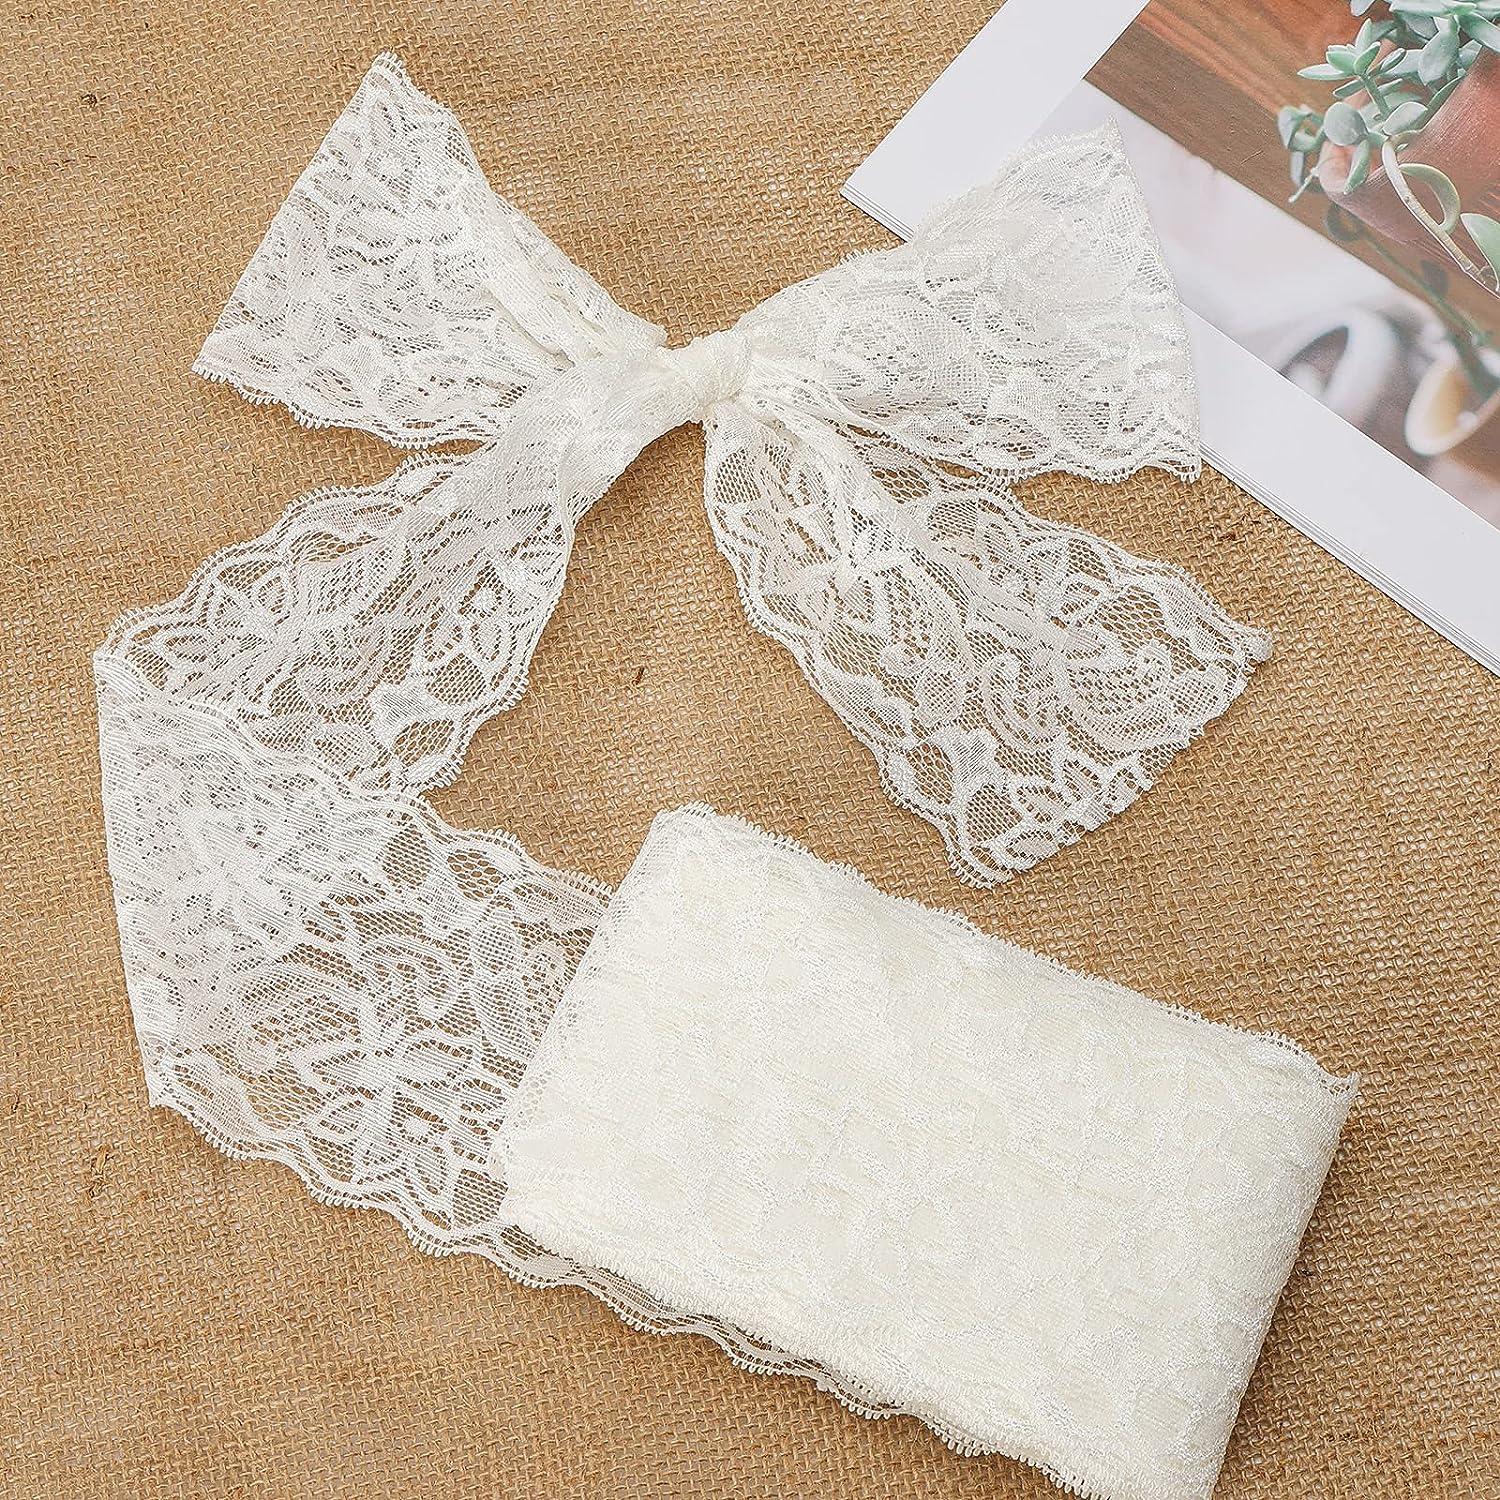  30 Yards White lace lace Ribbon, Gift Wrapping, Dress  Decoration, Wedding Decoration, Sewing Crafts (Style 5)